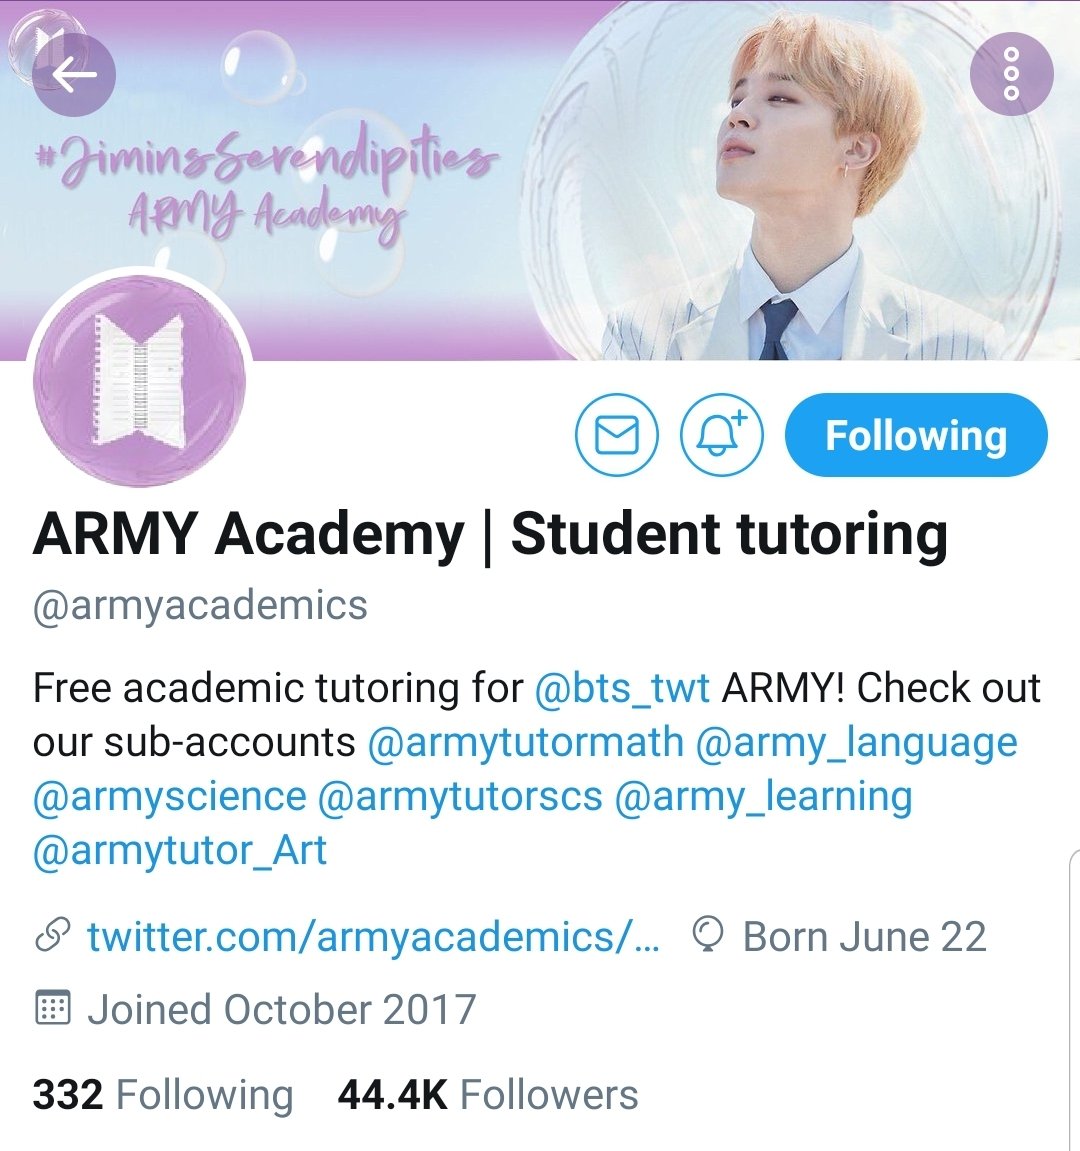 There are ARMY-run tutor accounts dedicated to offering tutoring services to any ARMYs in school. All of this is for free and accessible to everyone.